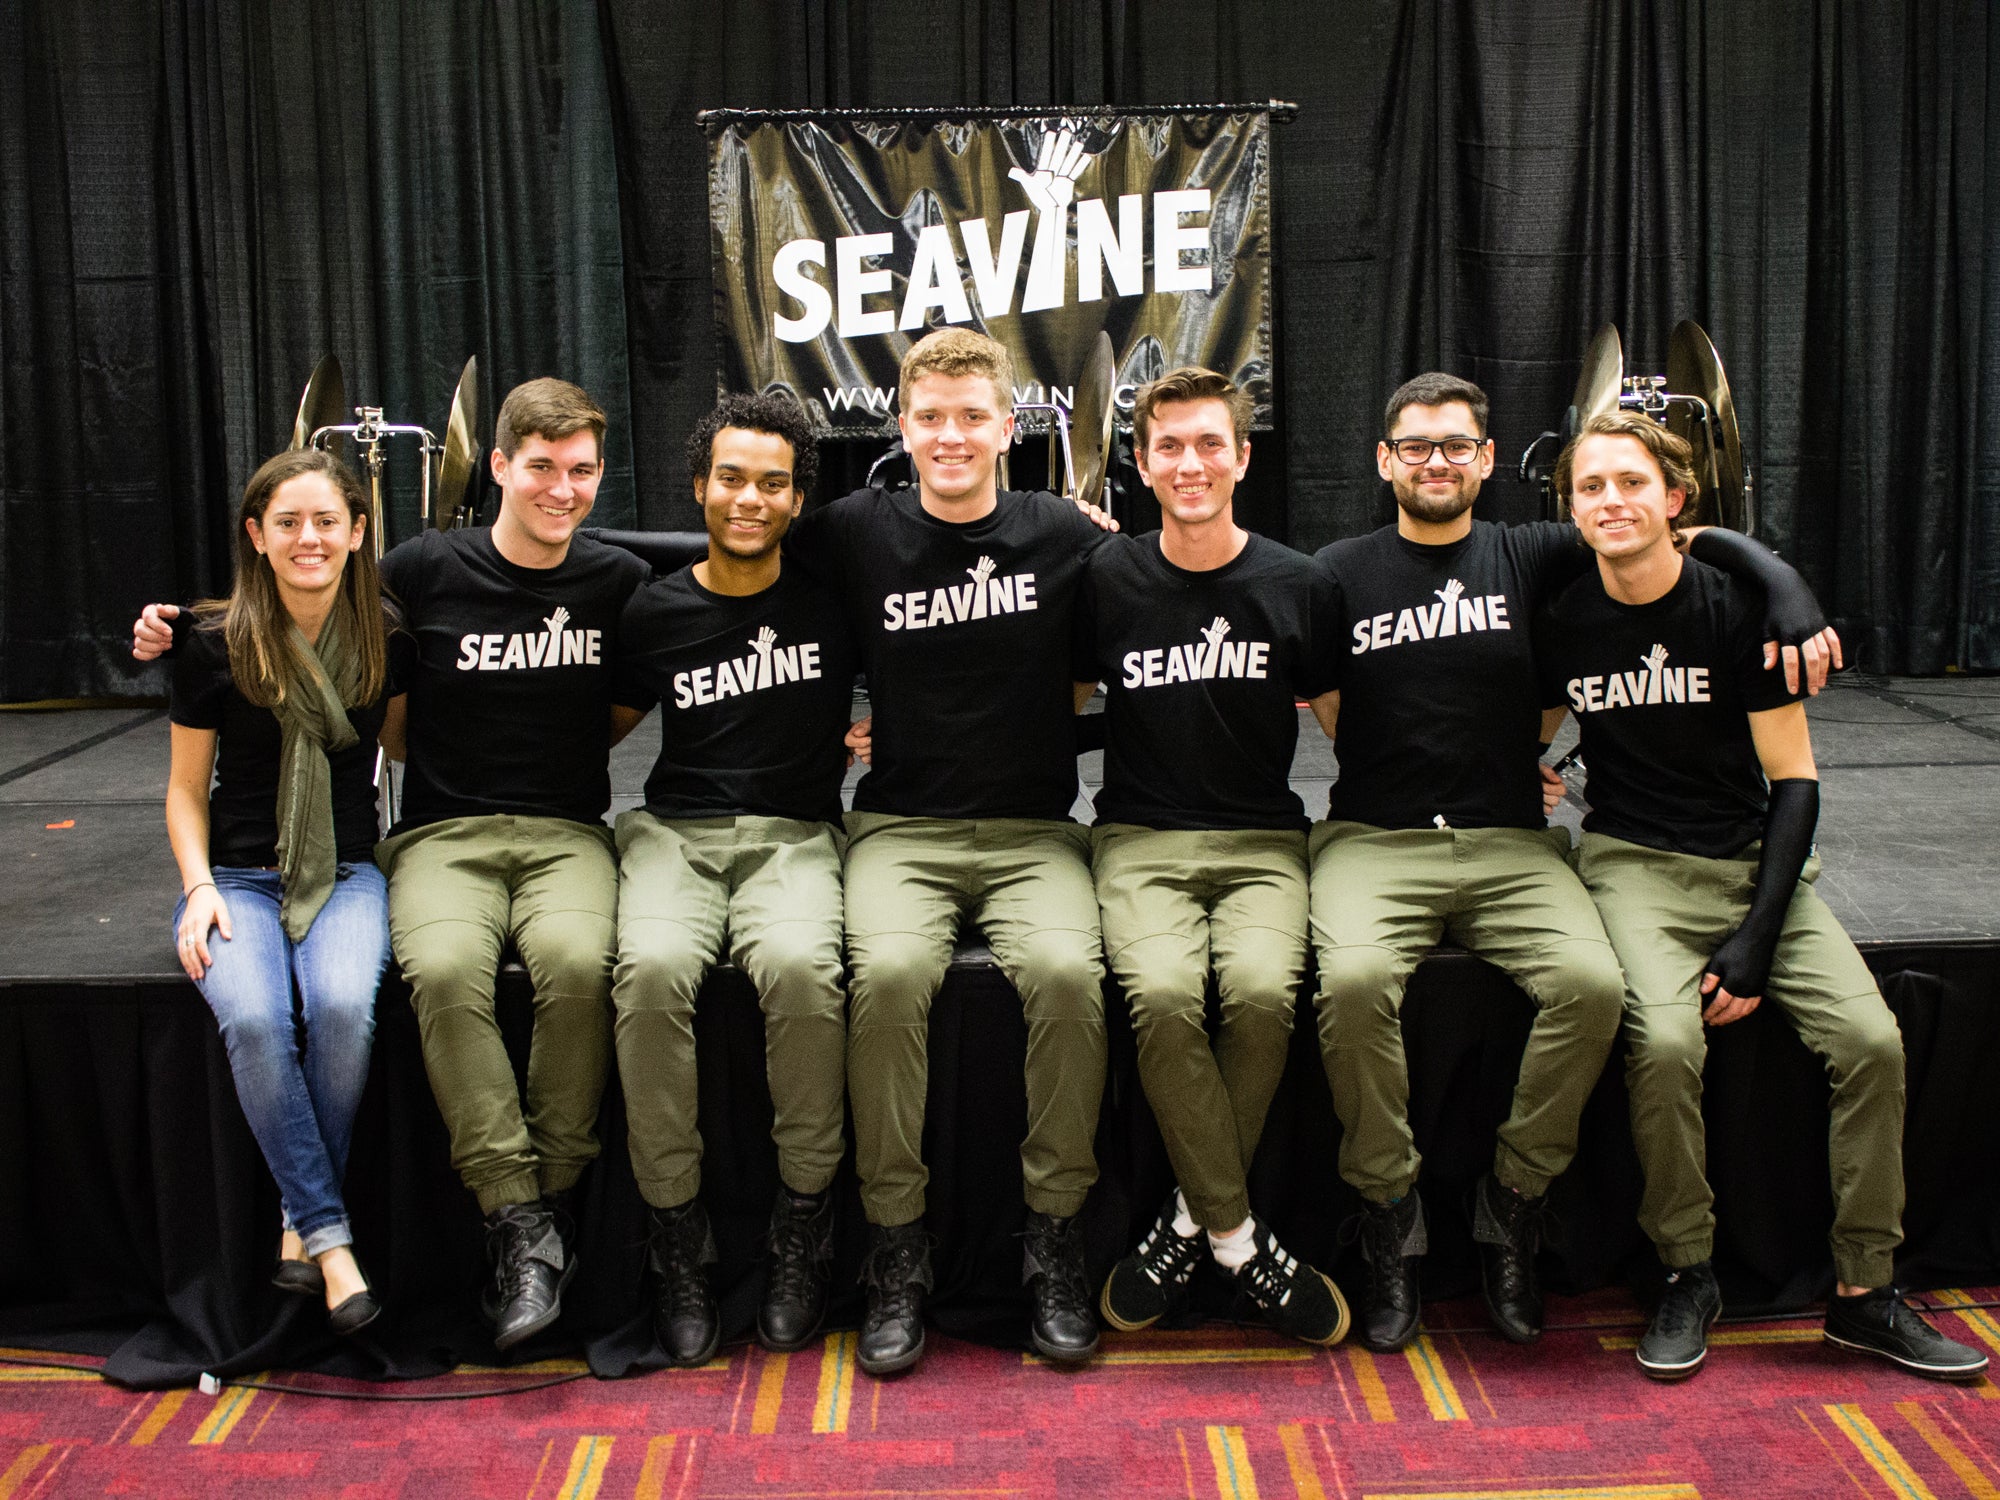 The 2017 Rhythm X Plateline with clinician Chelsea Levine at PASIC 2017